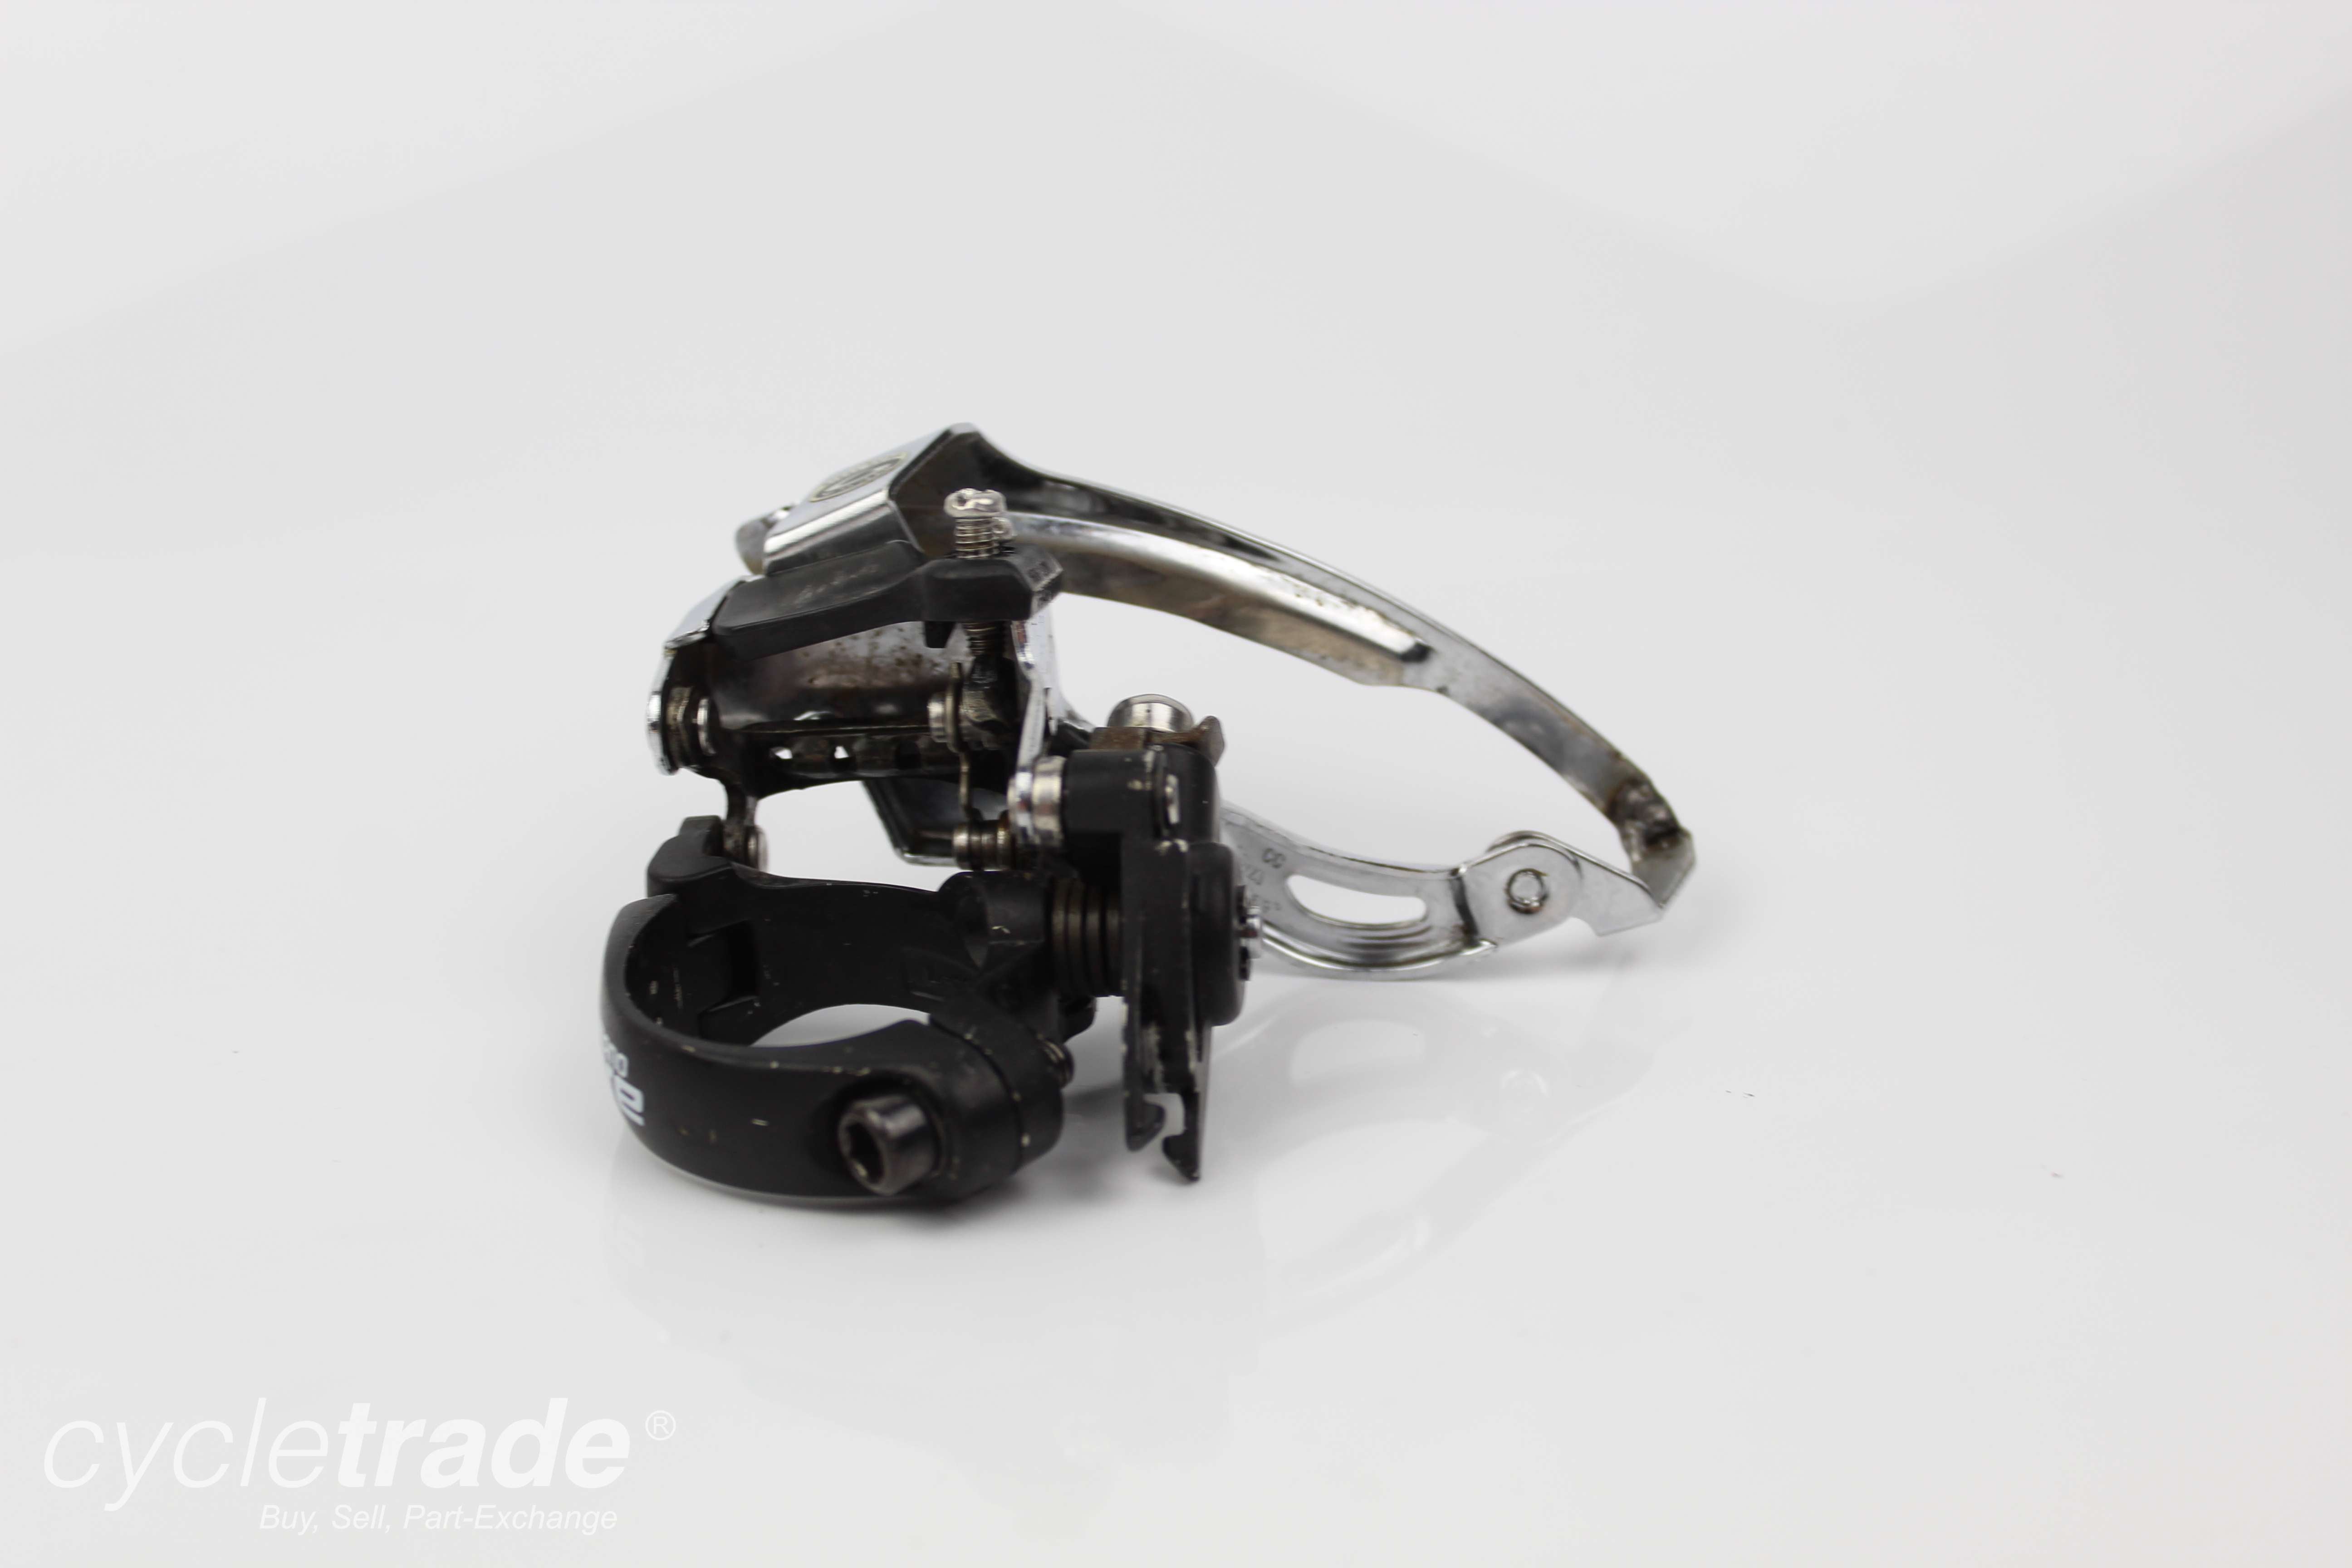 Front Derailleur- Shimano Deore FD-M510 3x9s 34.9mm Clamp On- Grade C